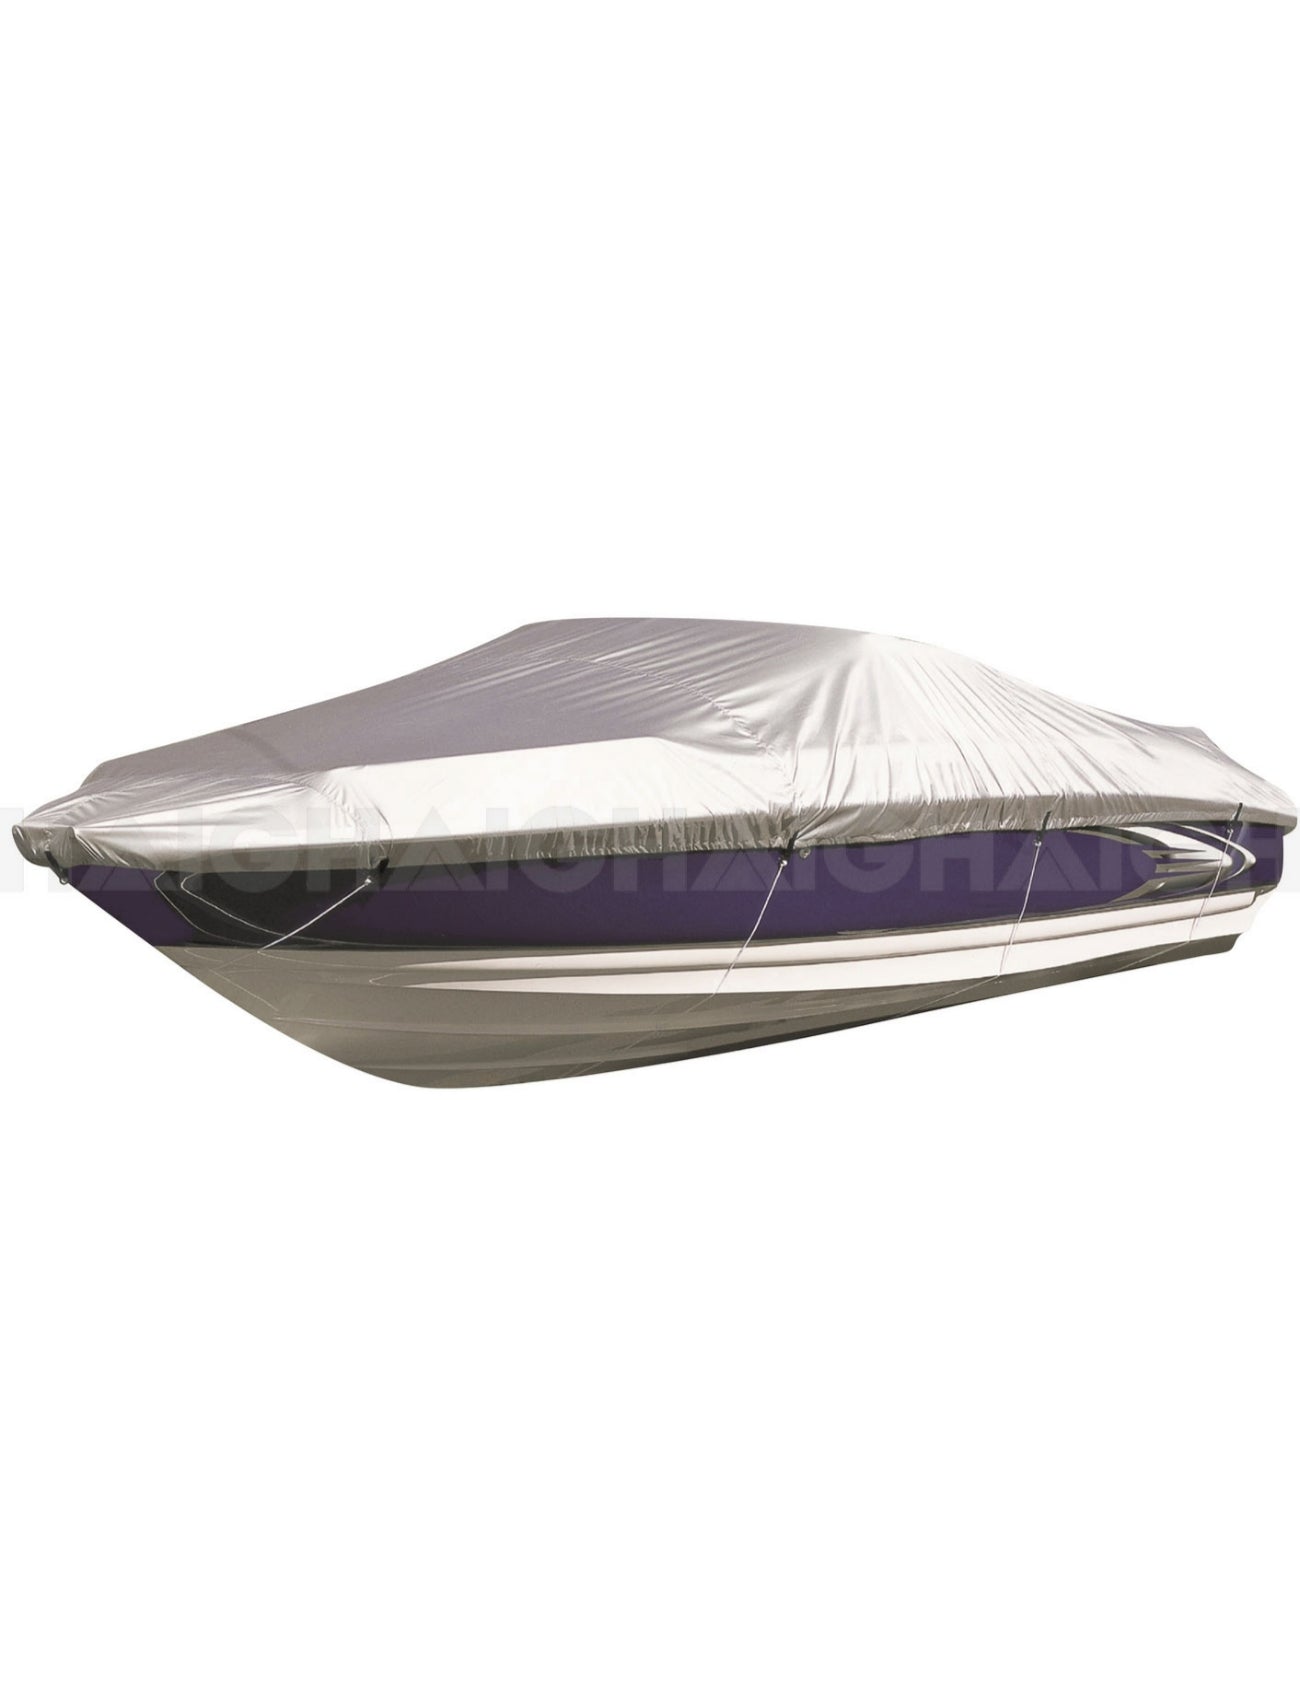 BOAT COVER SUNLAND FITS 4.8m - 5.6m